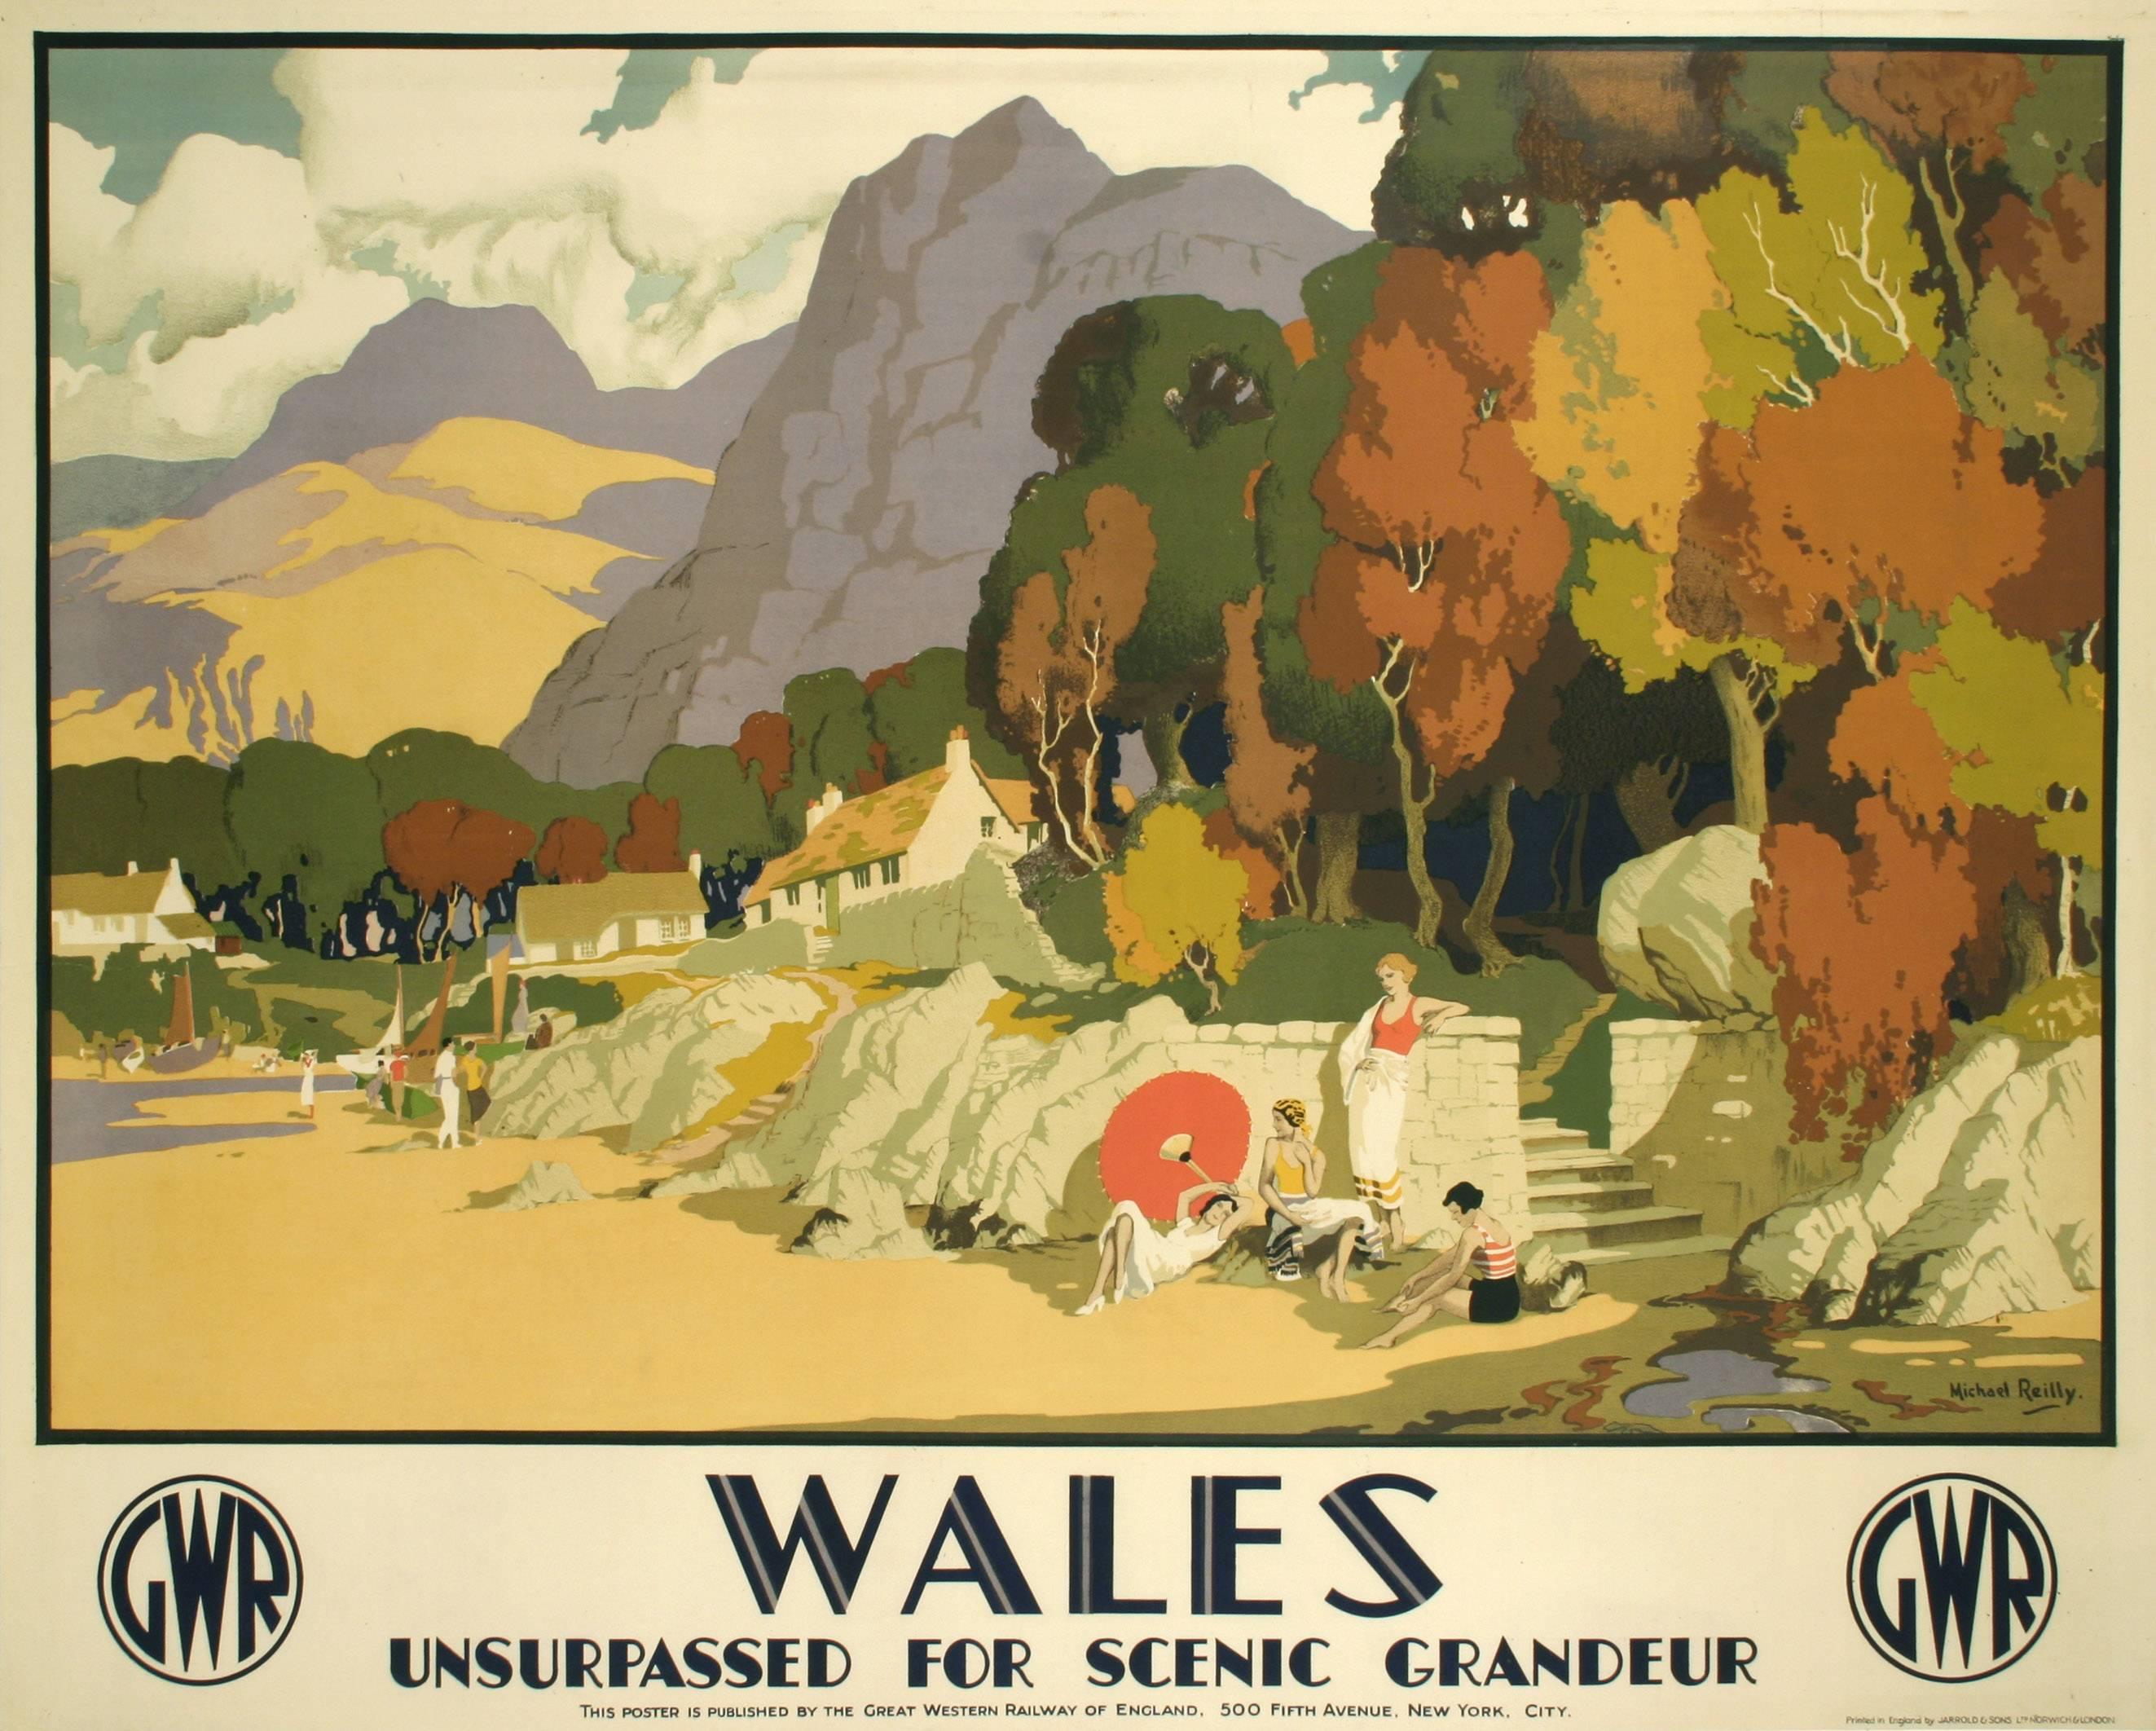 A British Railway poster by Michael Reilly, circa 1930. This piece promotes rail travel to Wales, &quot;unsurpassed for scenic grandeur,&quot; with its mountains and beaches.   

Reilly (b. 1898) was a well respected British landscape painter.